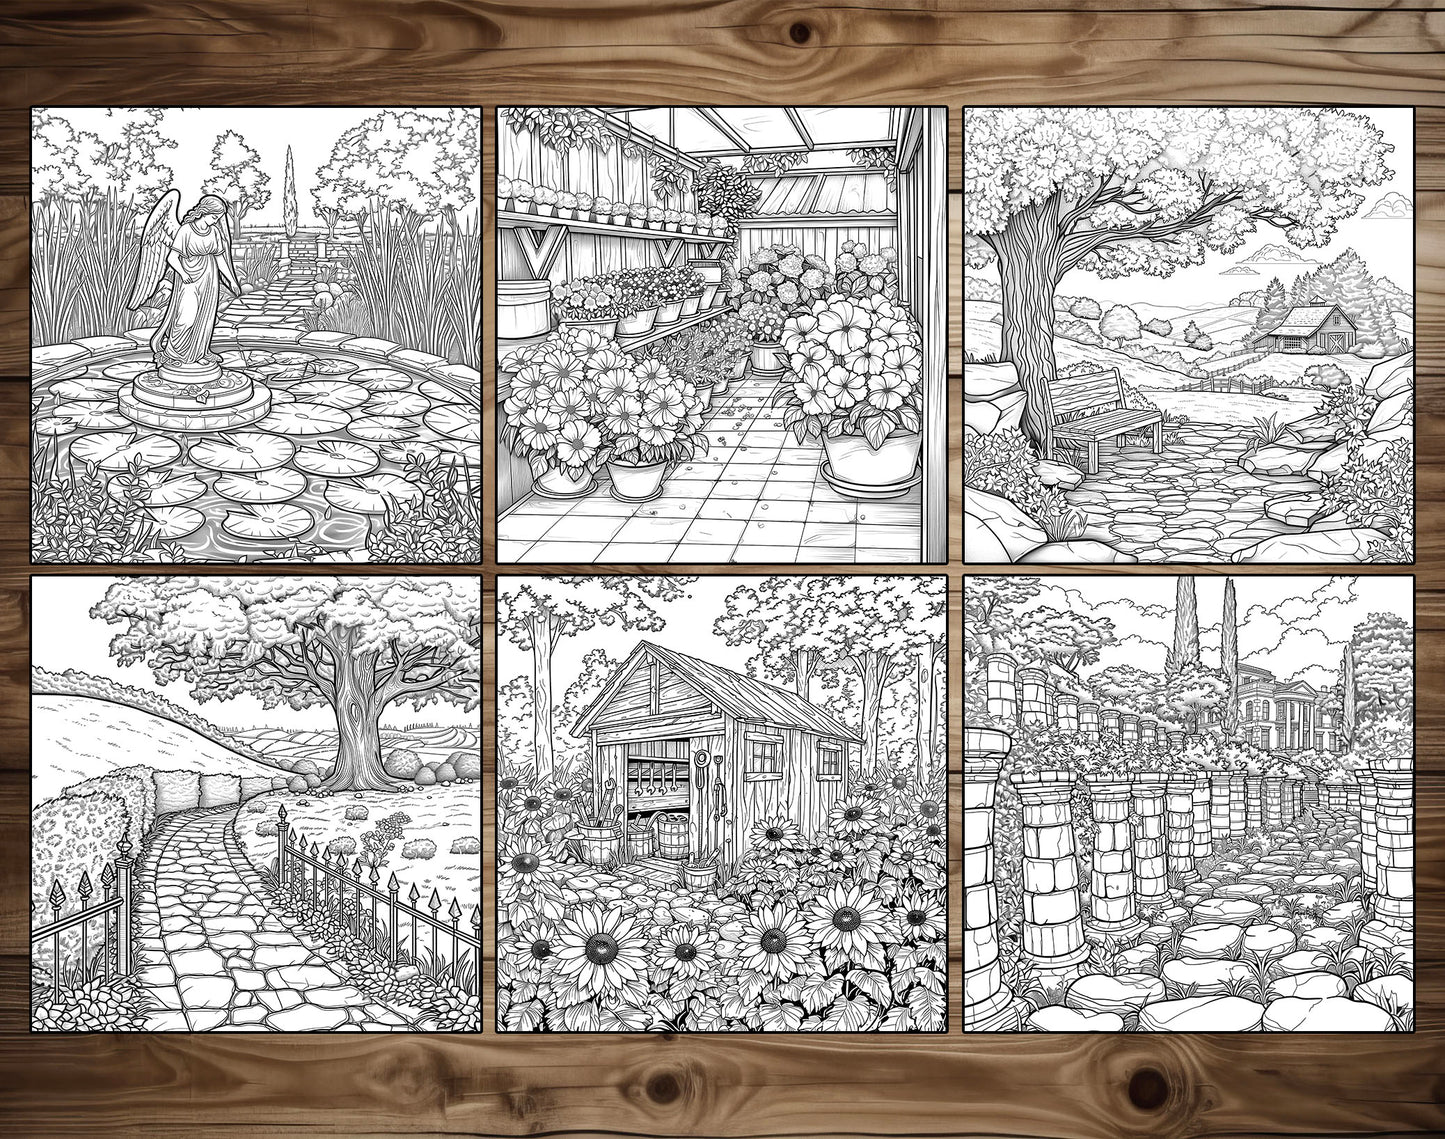 101 Relaxing Garden Coloring Pages - Instant Download - Printable